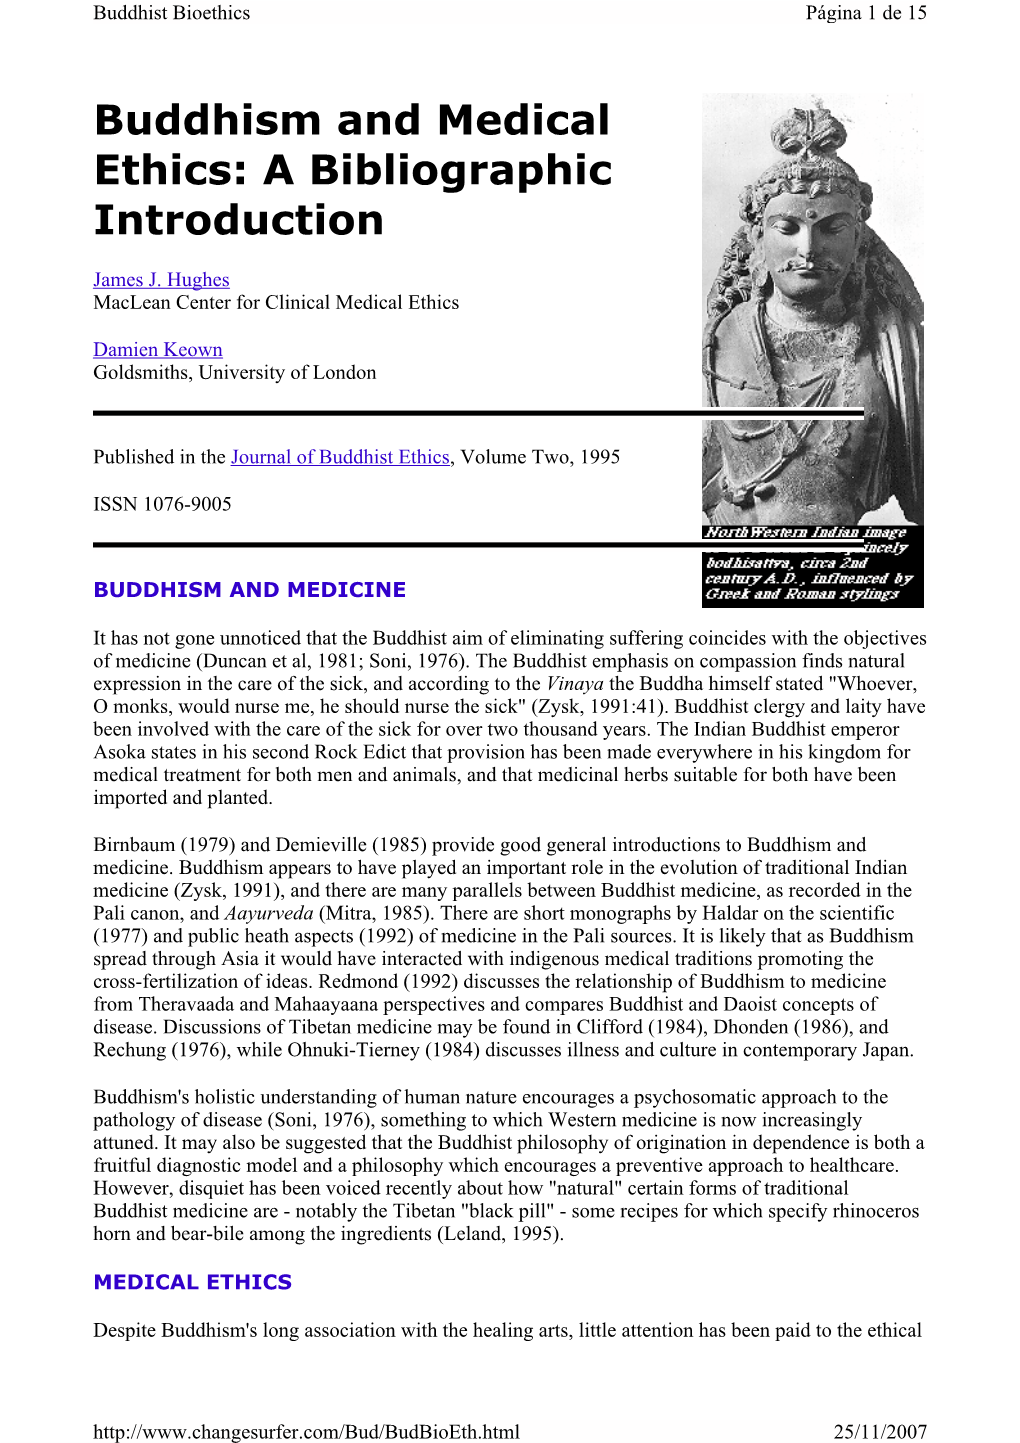 Buddhism and Medical Ethics: a Bibliographic Introduction